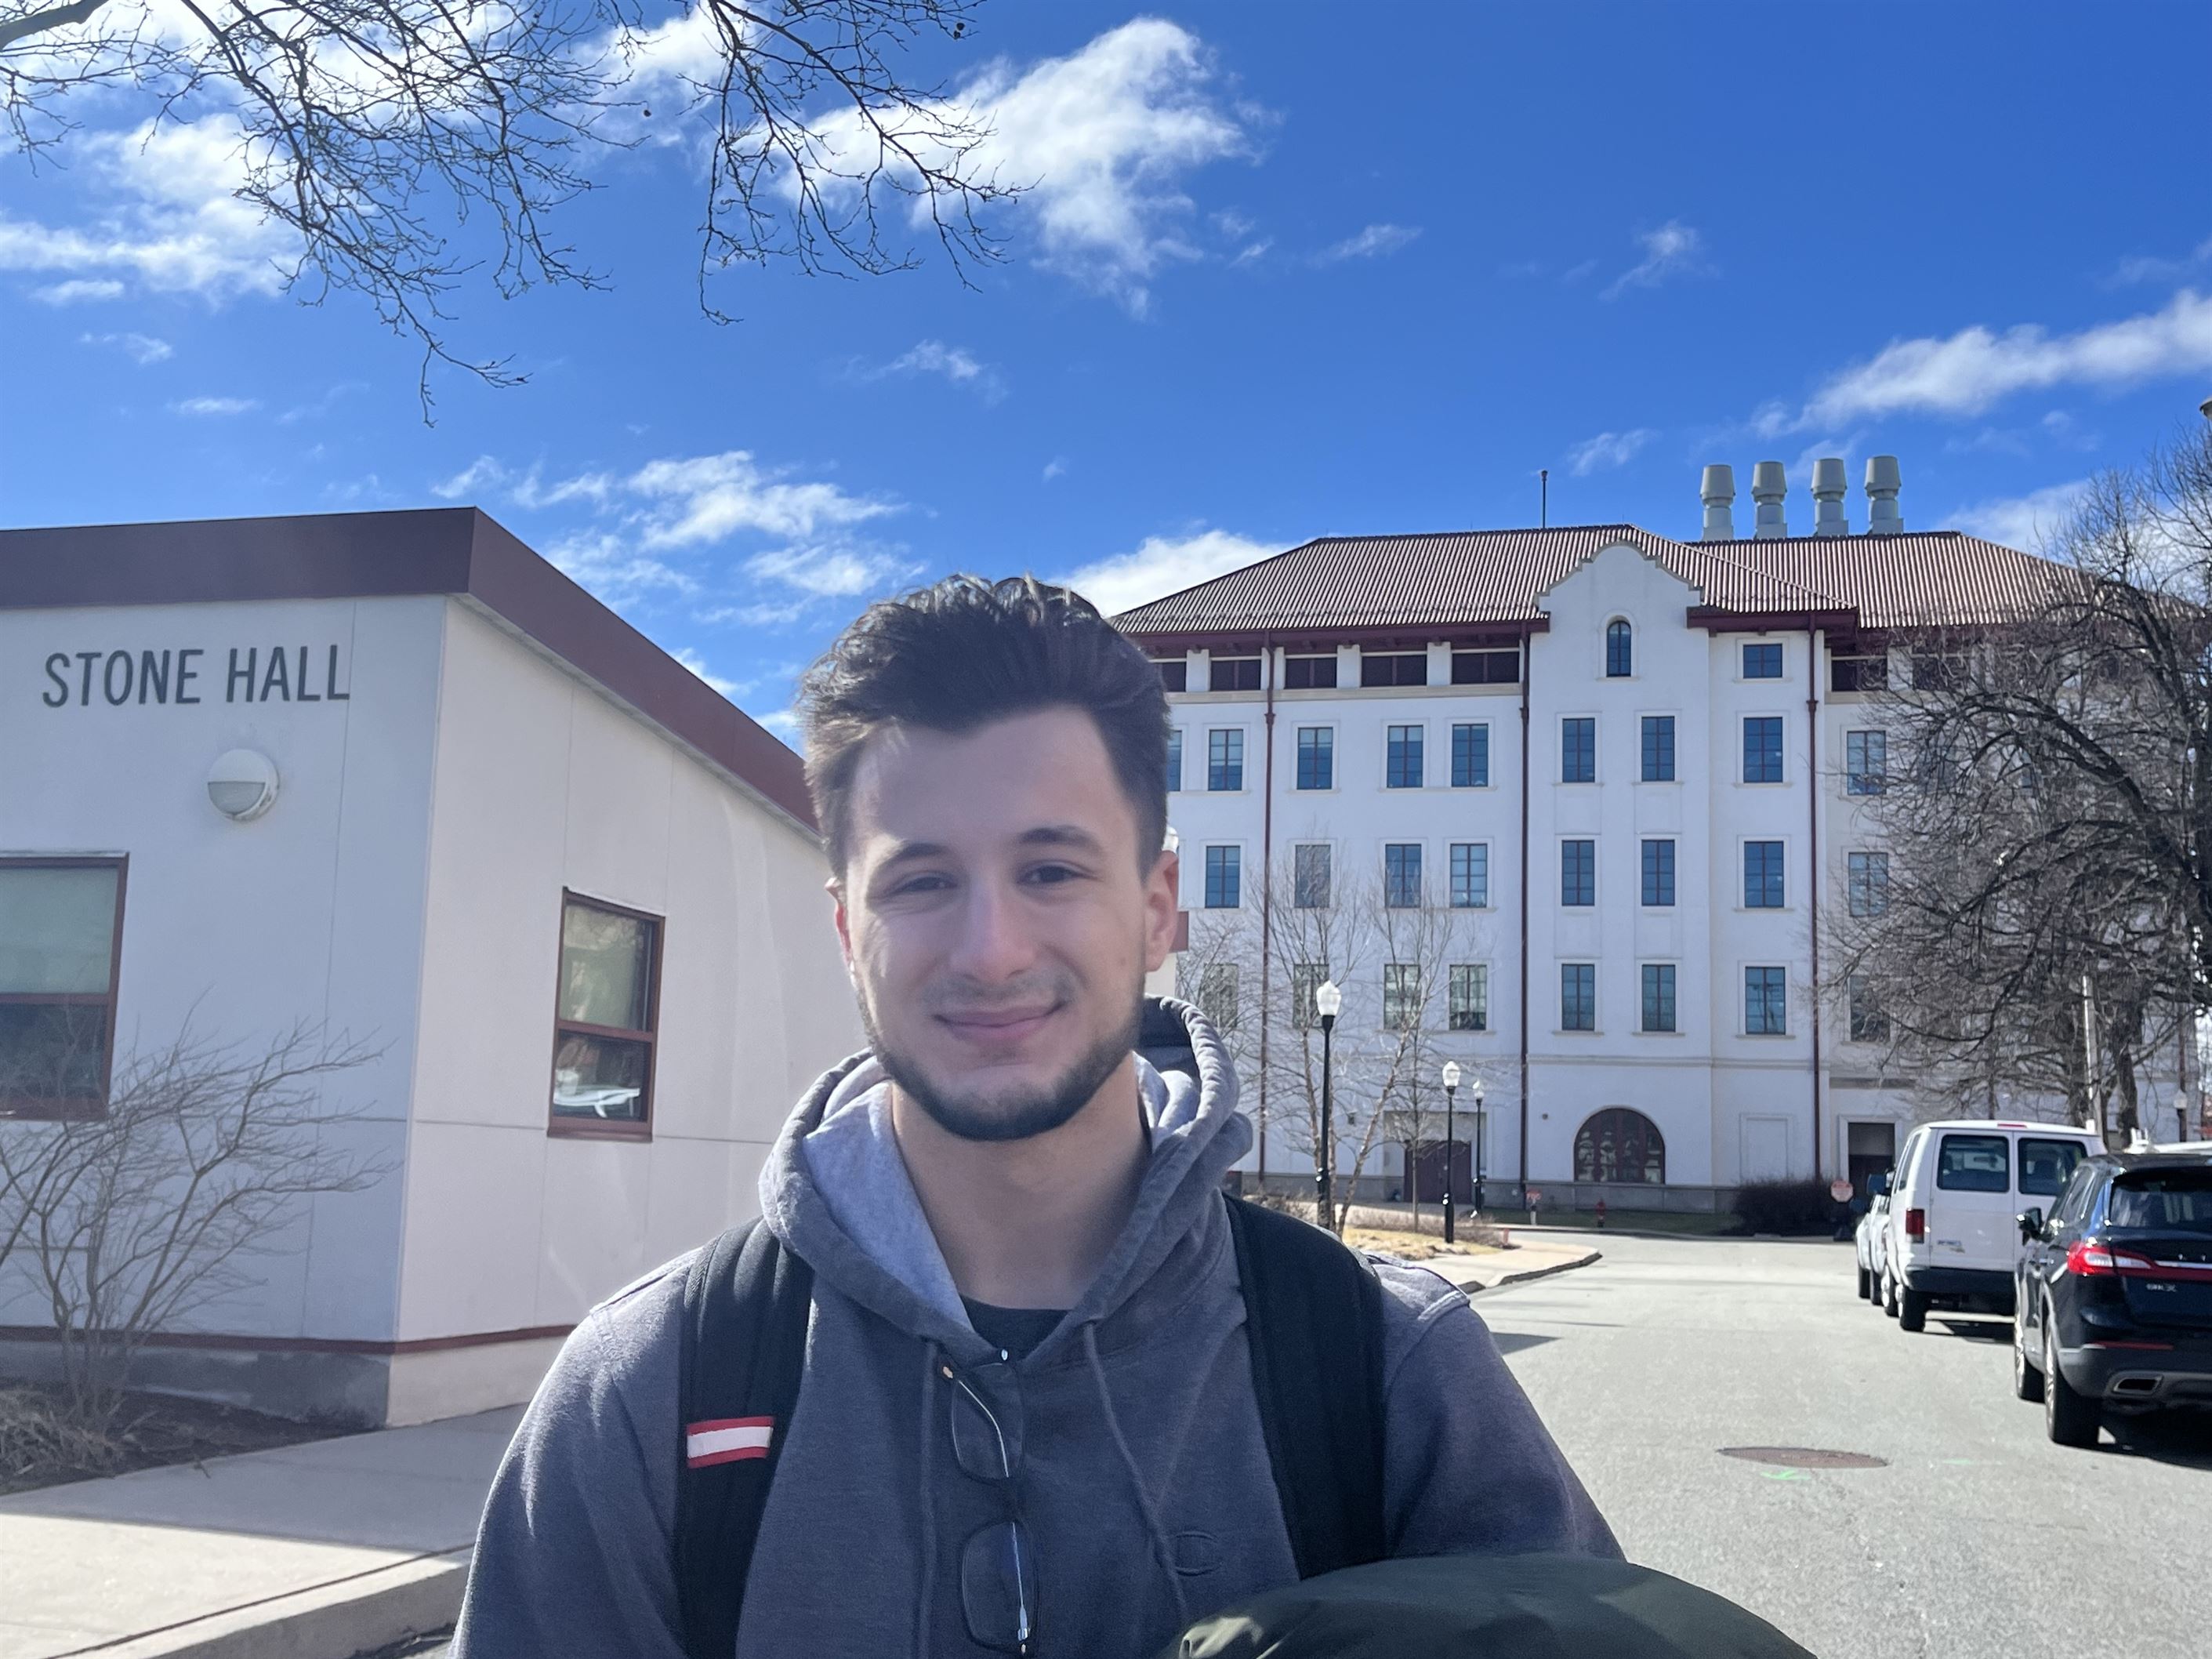 Stephen Conte, a senior mathematics major, says the drill caught his attention.
Jenna Sundel | The Montclarion